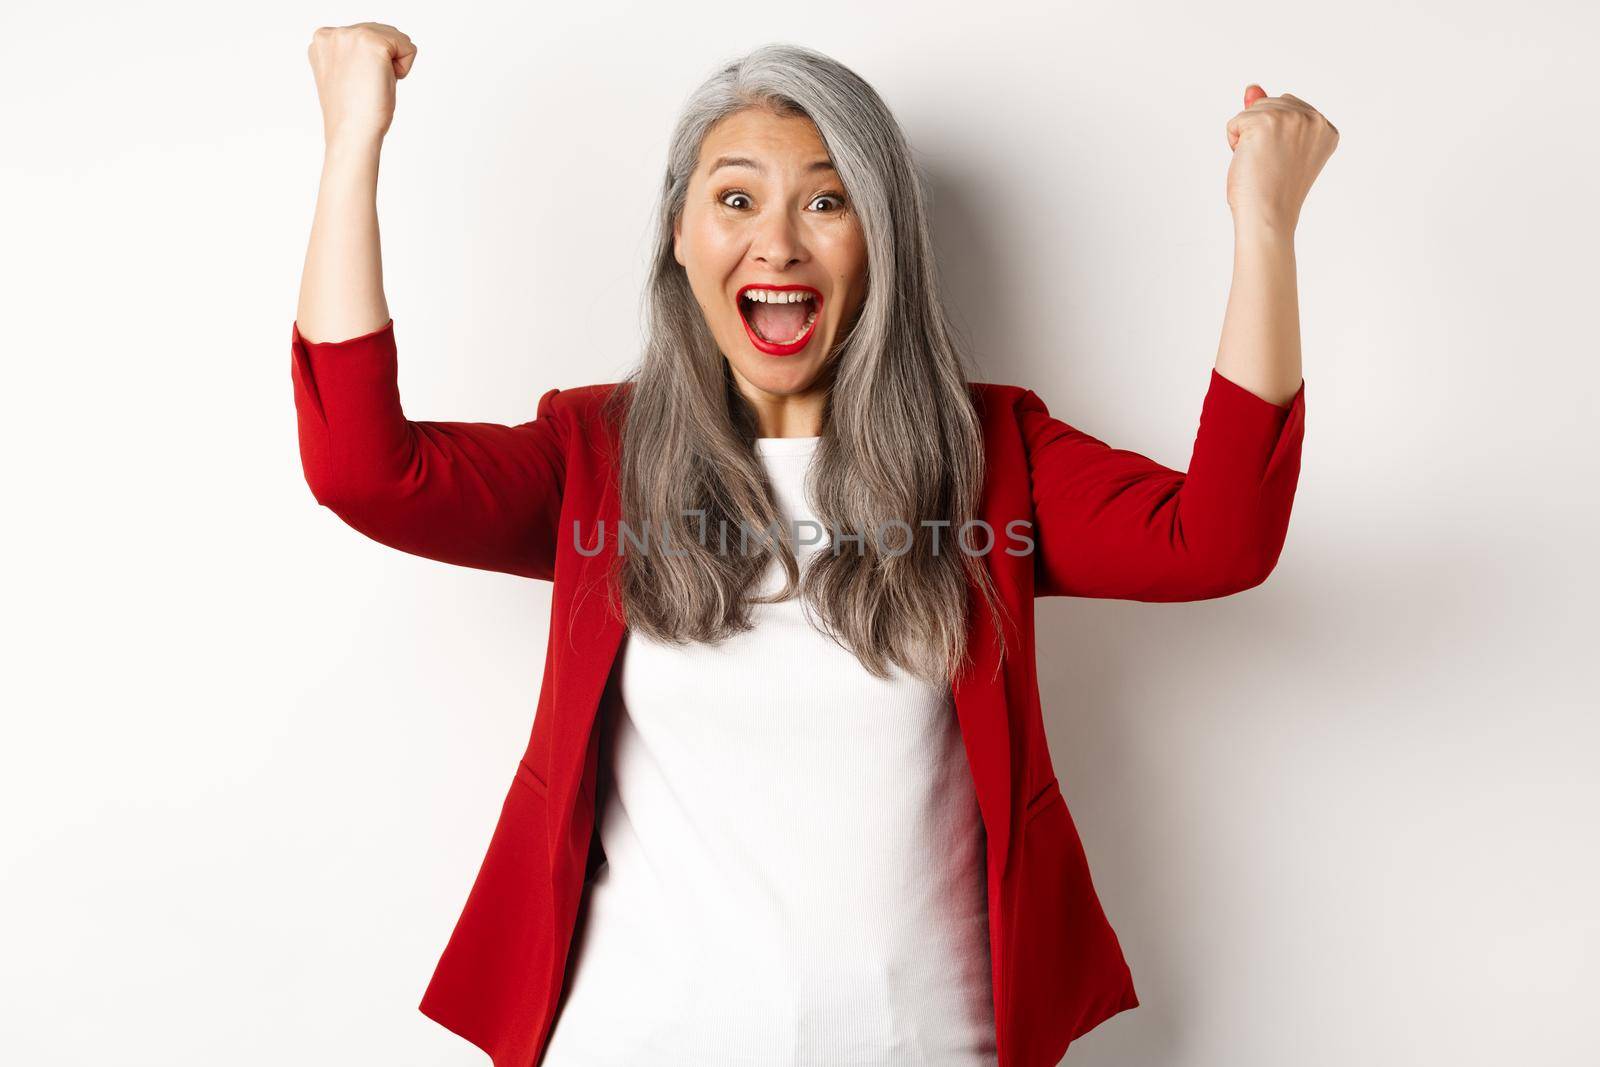 Lucky senior woman achieve success, winning prize and celebrating, saying yes with fist pumps, standing happy against white background.